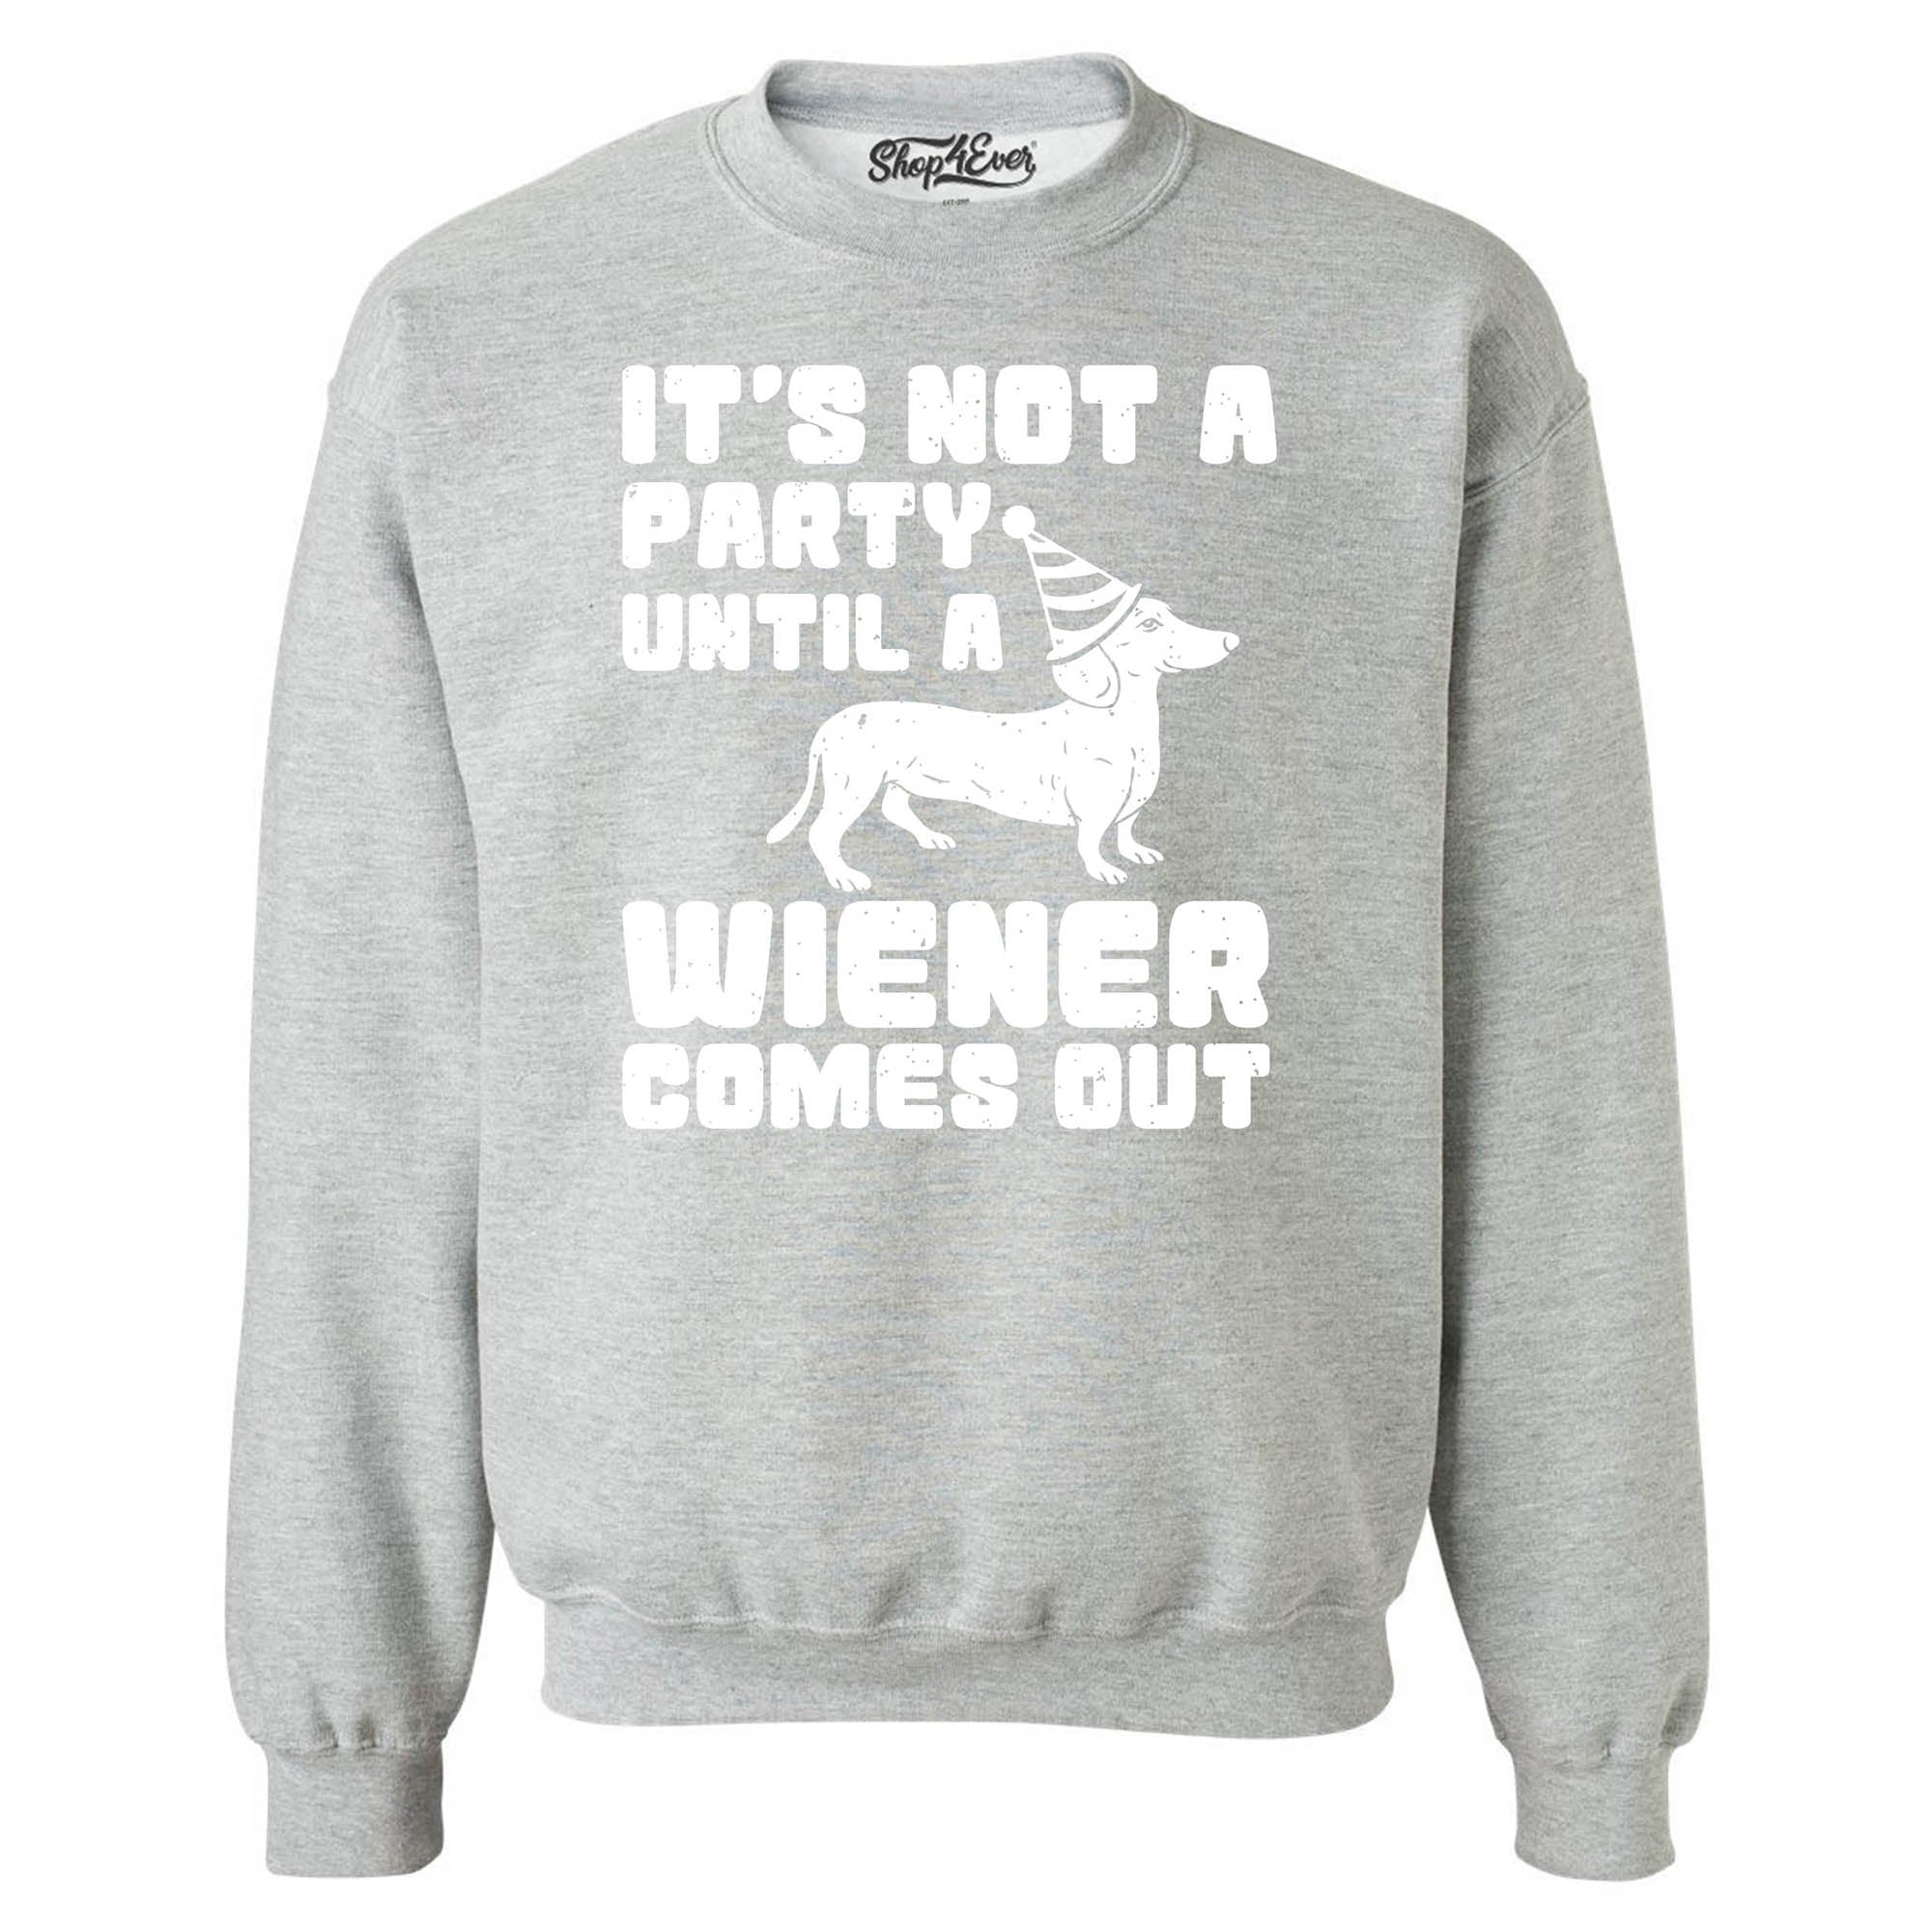 It's Not a Party Until the Wiener Comes Out Funny Dachshund Crewneck Sweatshirts